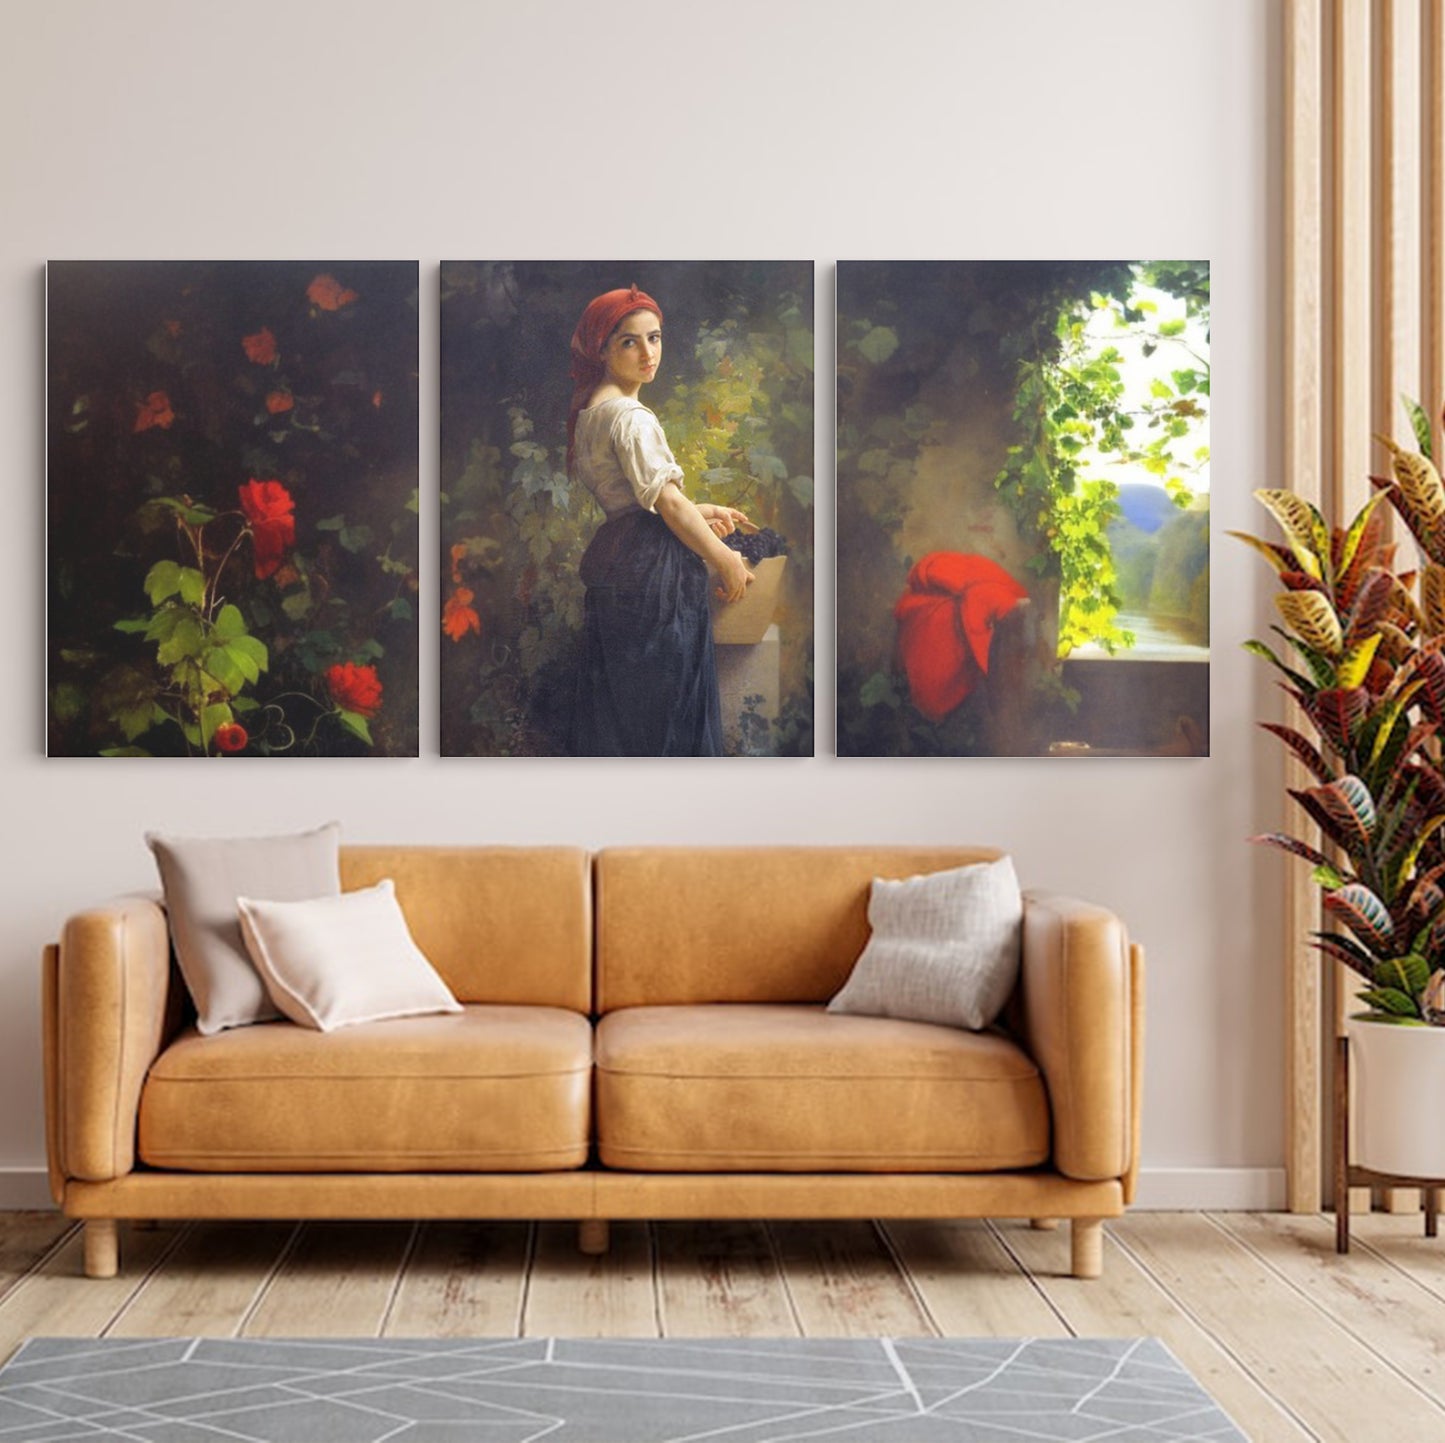 Harvest Serenade: Girl with Grapes in Floral Splendor - Enchanting Wall Art Celebrating the Beauty of Nature's Bounty and Delicate Femininity - S06E16